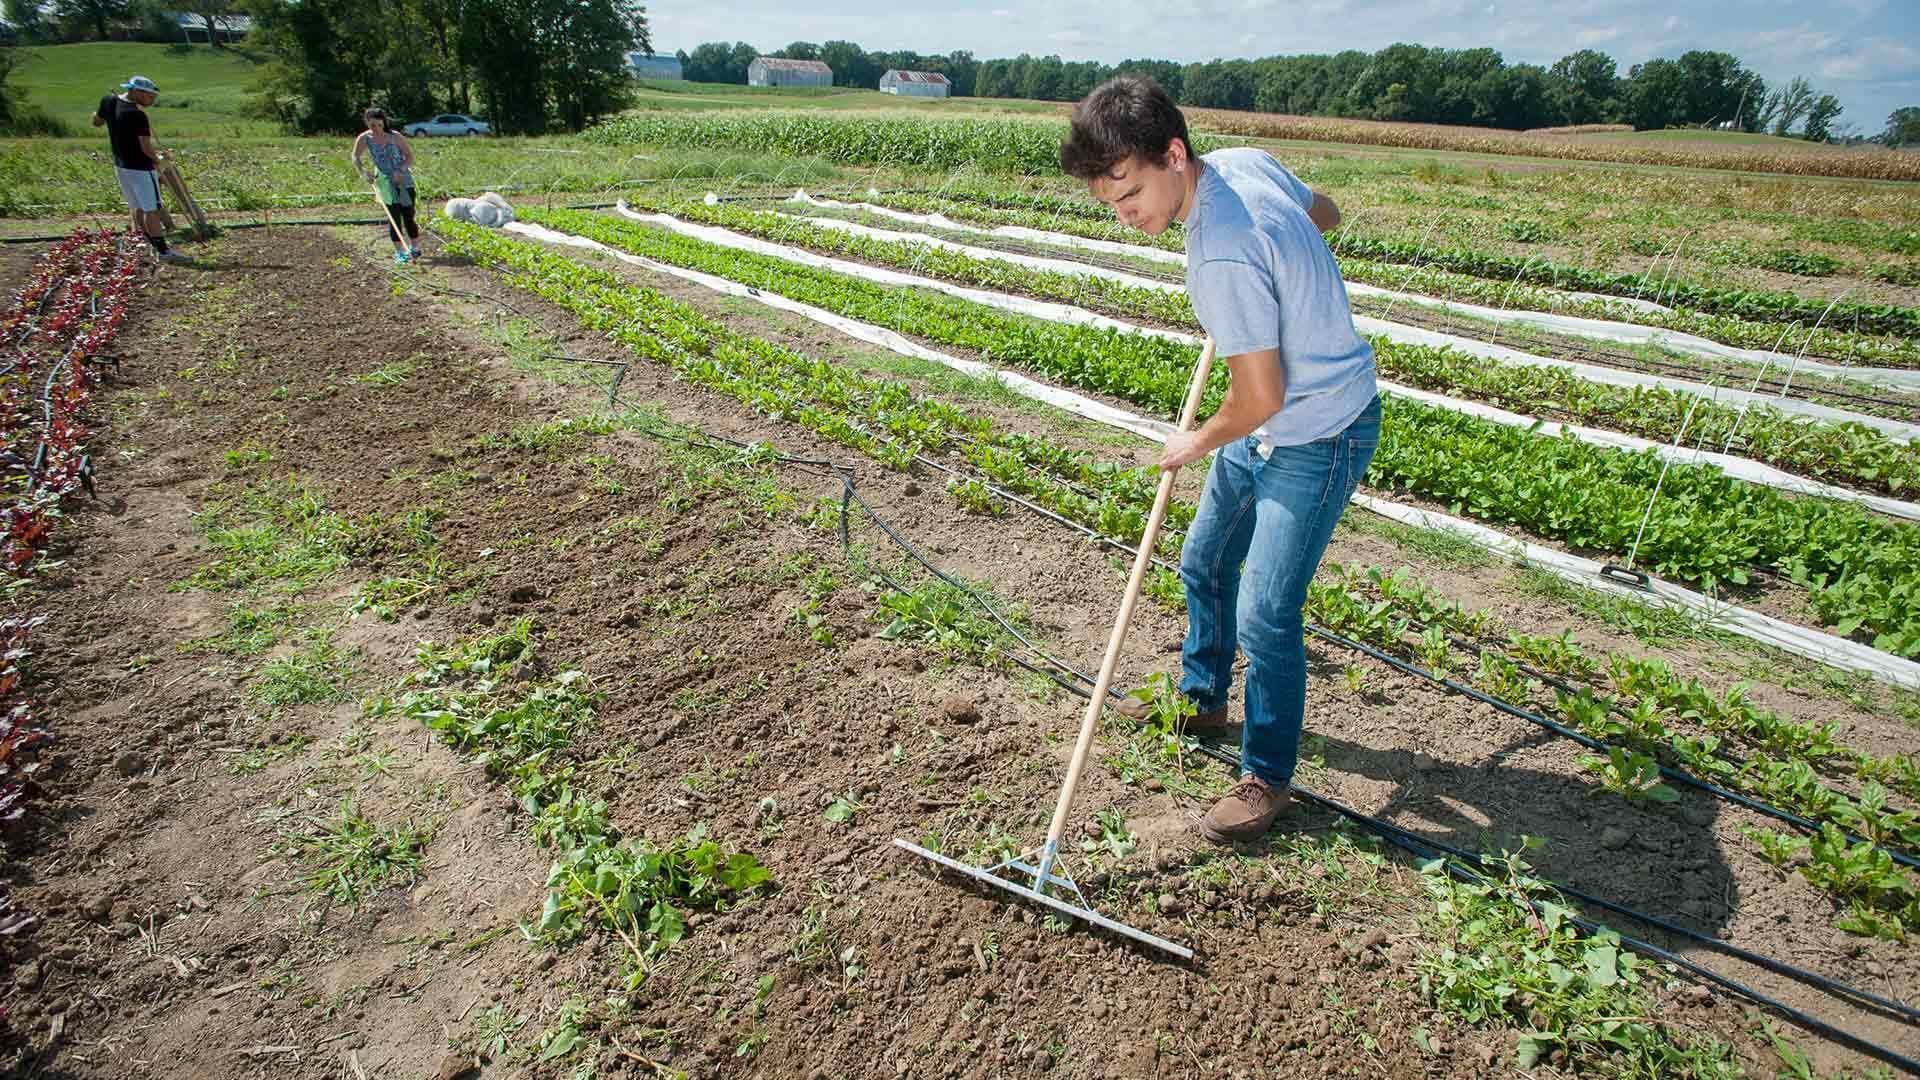 Student working at Terp Farm